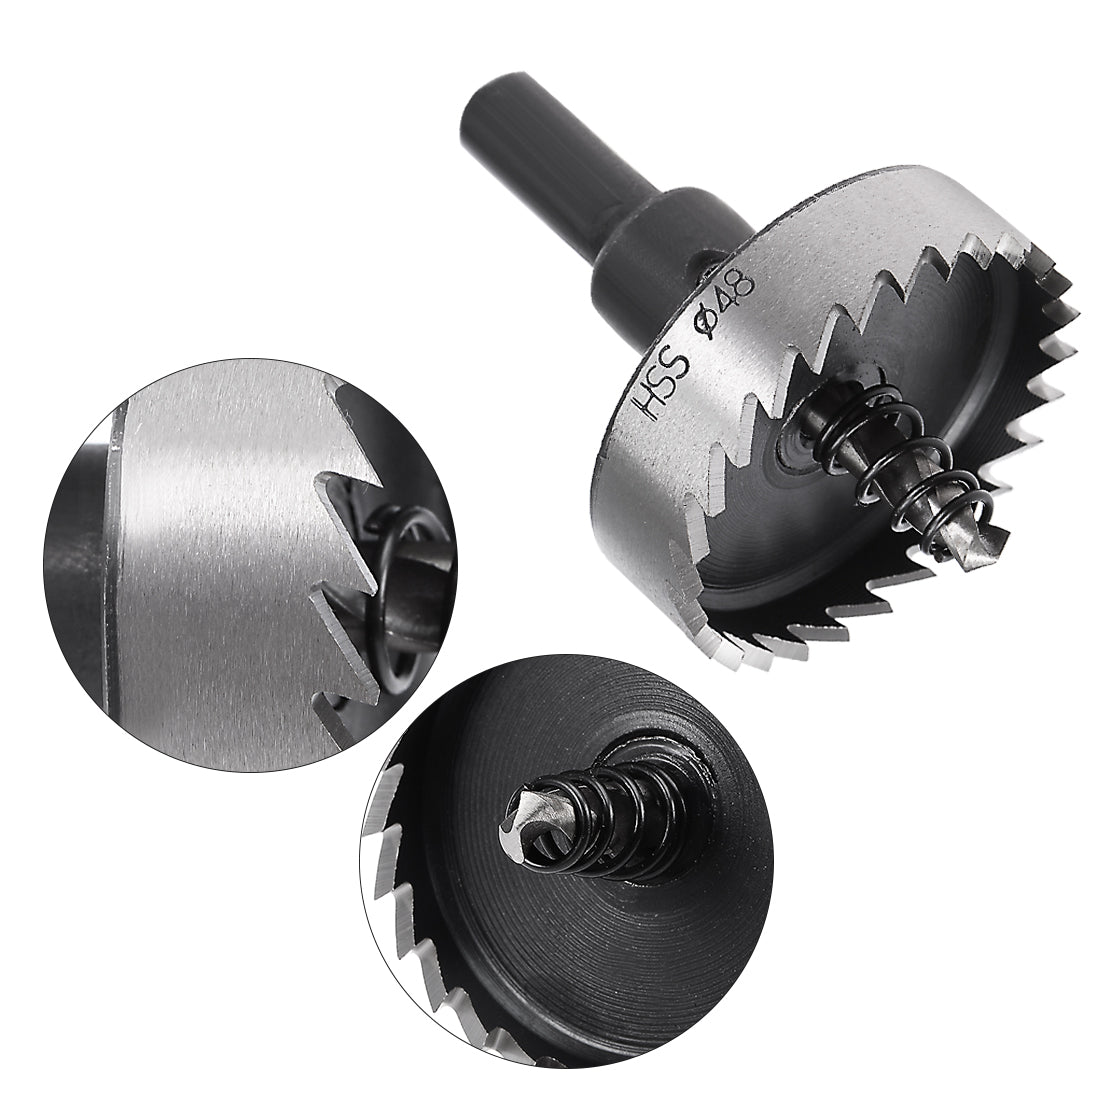 Uxcell Uxcell 19.5mm HSS Drill Bit Hole Saw Cutter for Metal Alloy Wood